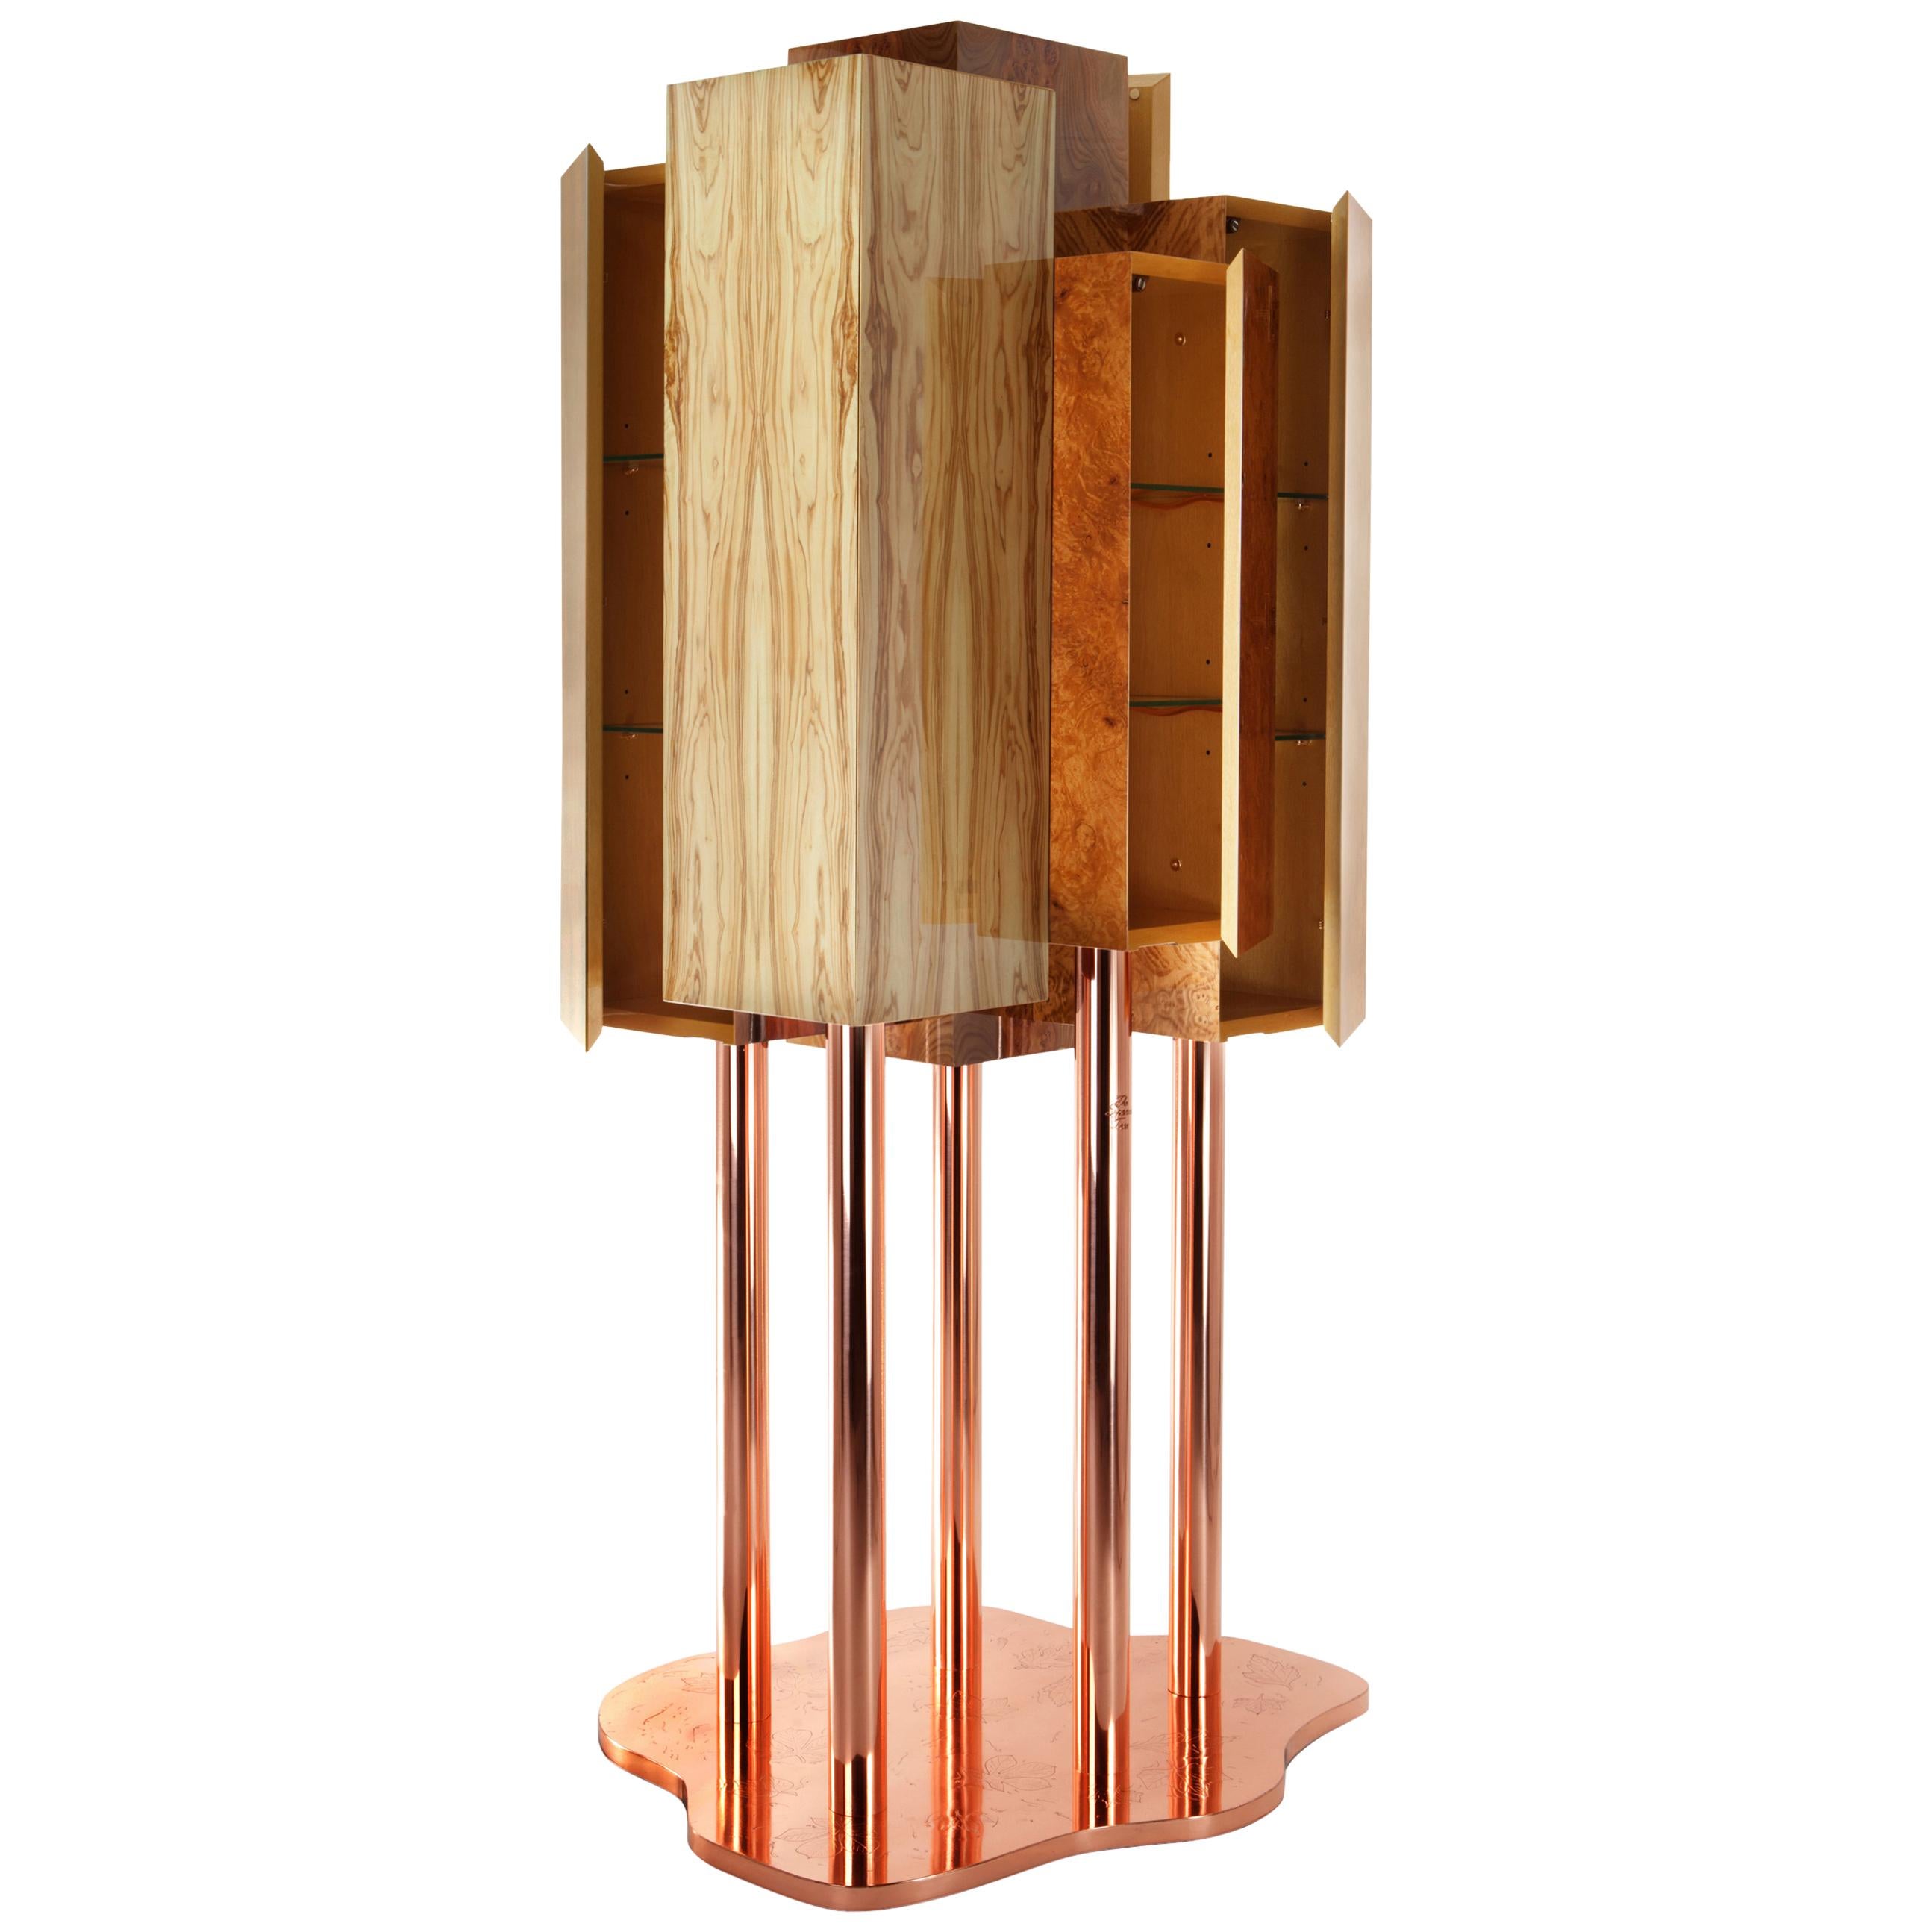 Special Tree Cabinet, Woods and Copper, InsidherLand by Joana Santos Barbosa